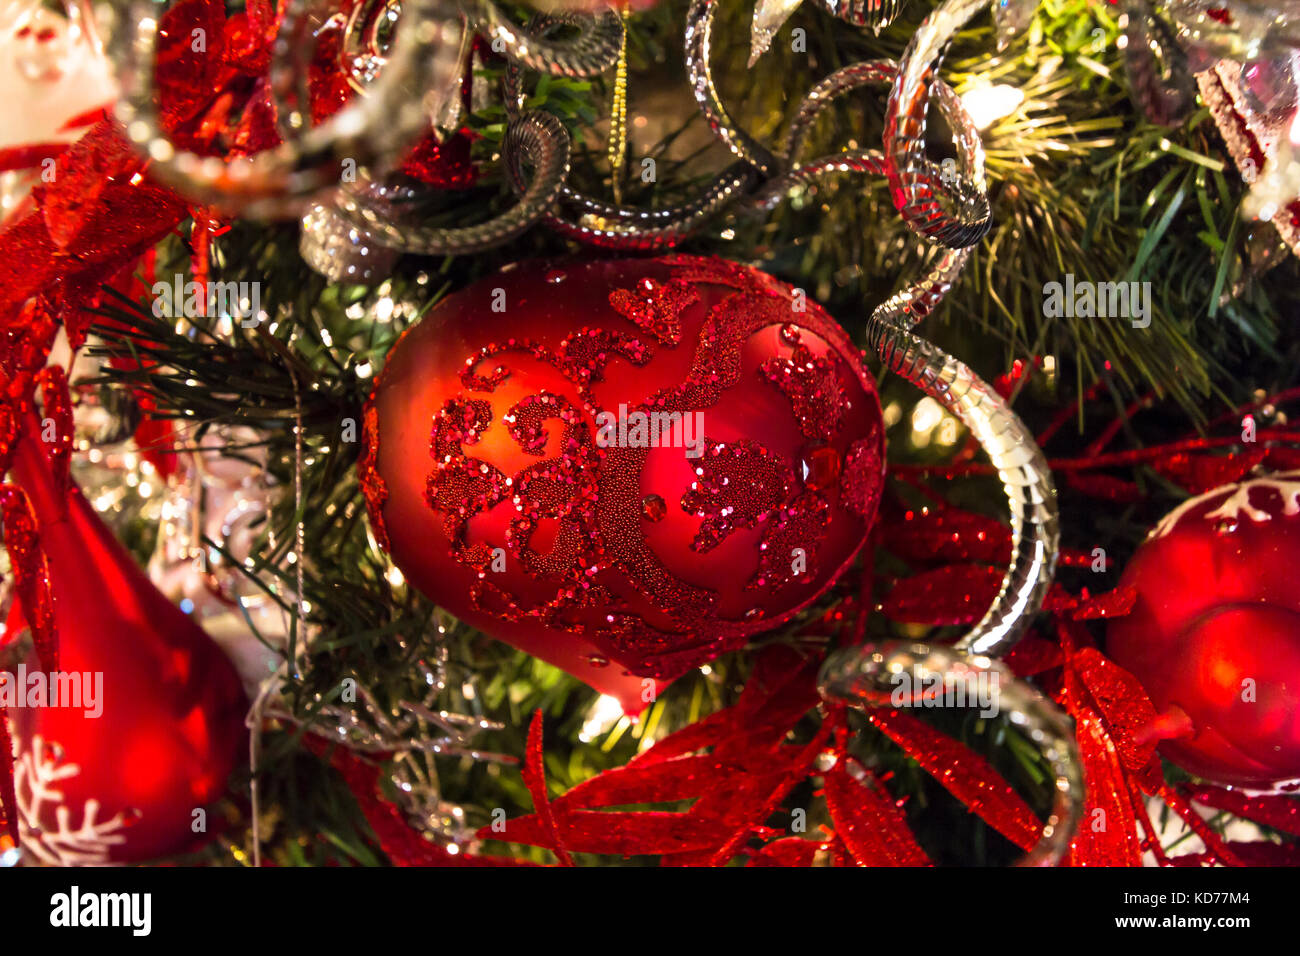 White, red and green Christmas decorations. Stock Photo